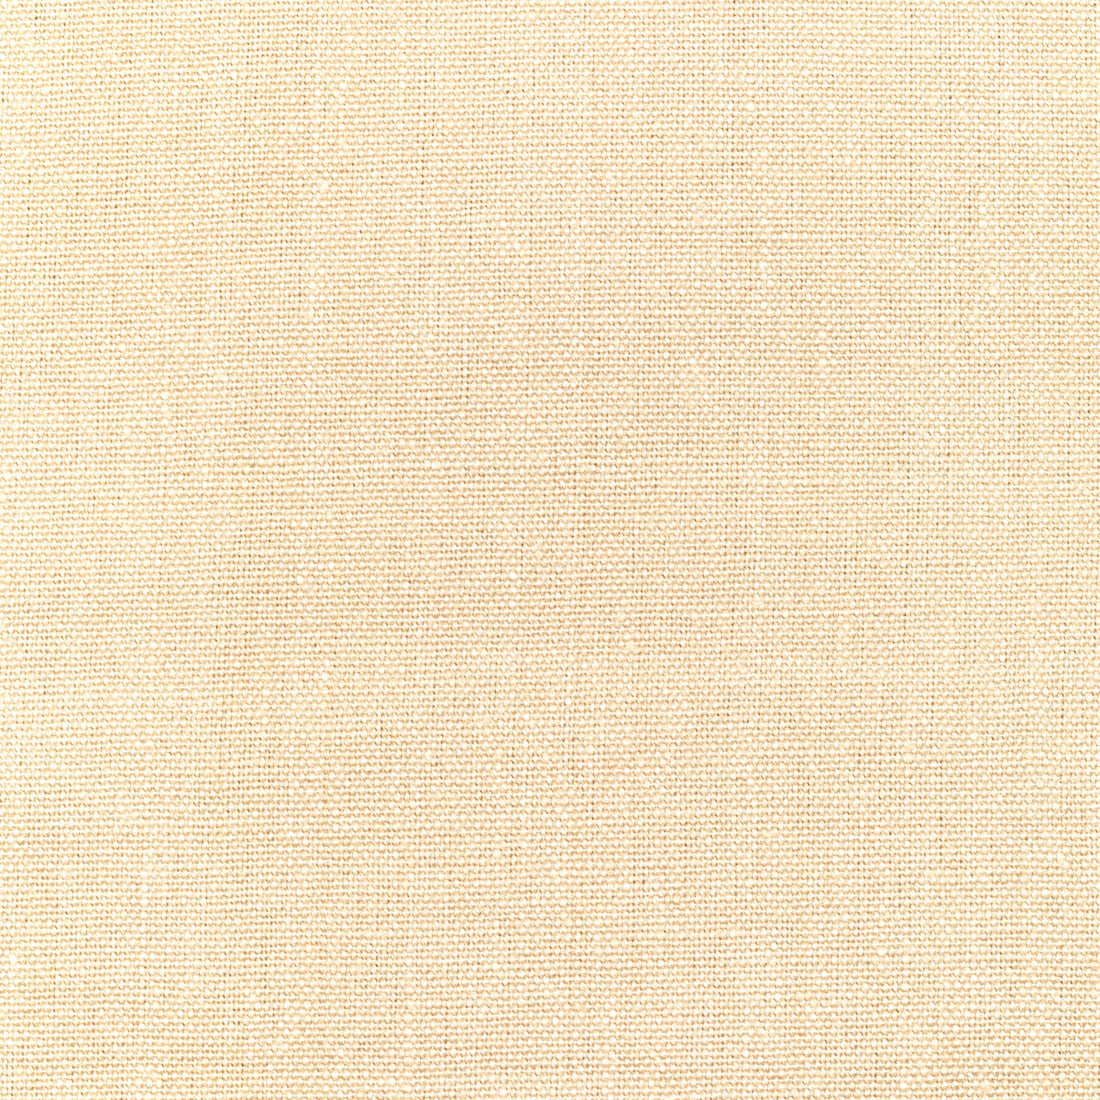 Watermill fabric in cream color - pattern 30421.1.0 - by Kravet Basics in the Perfect Plains collection